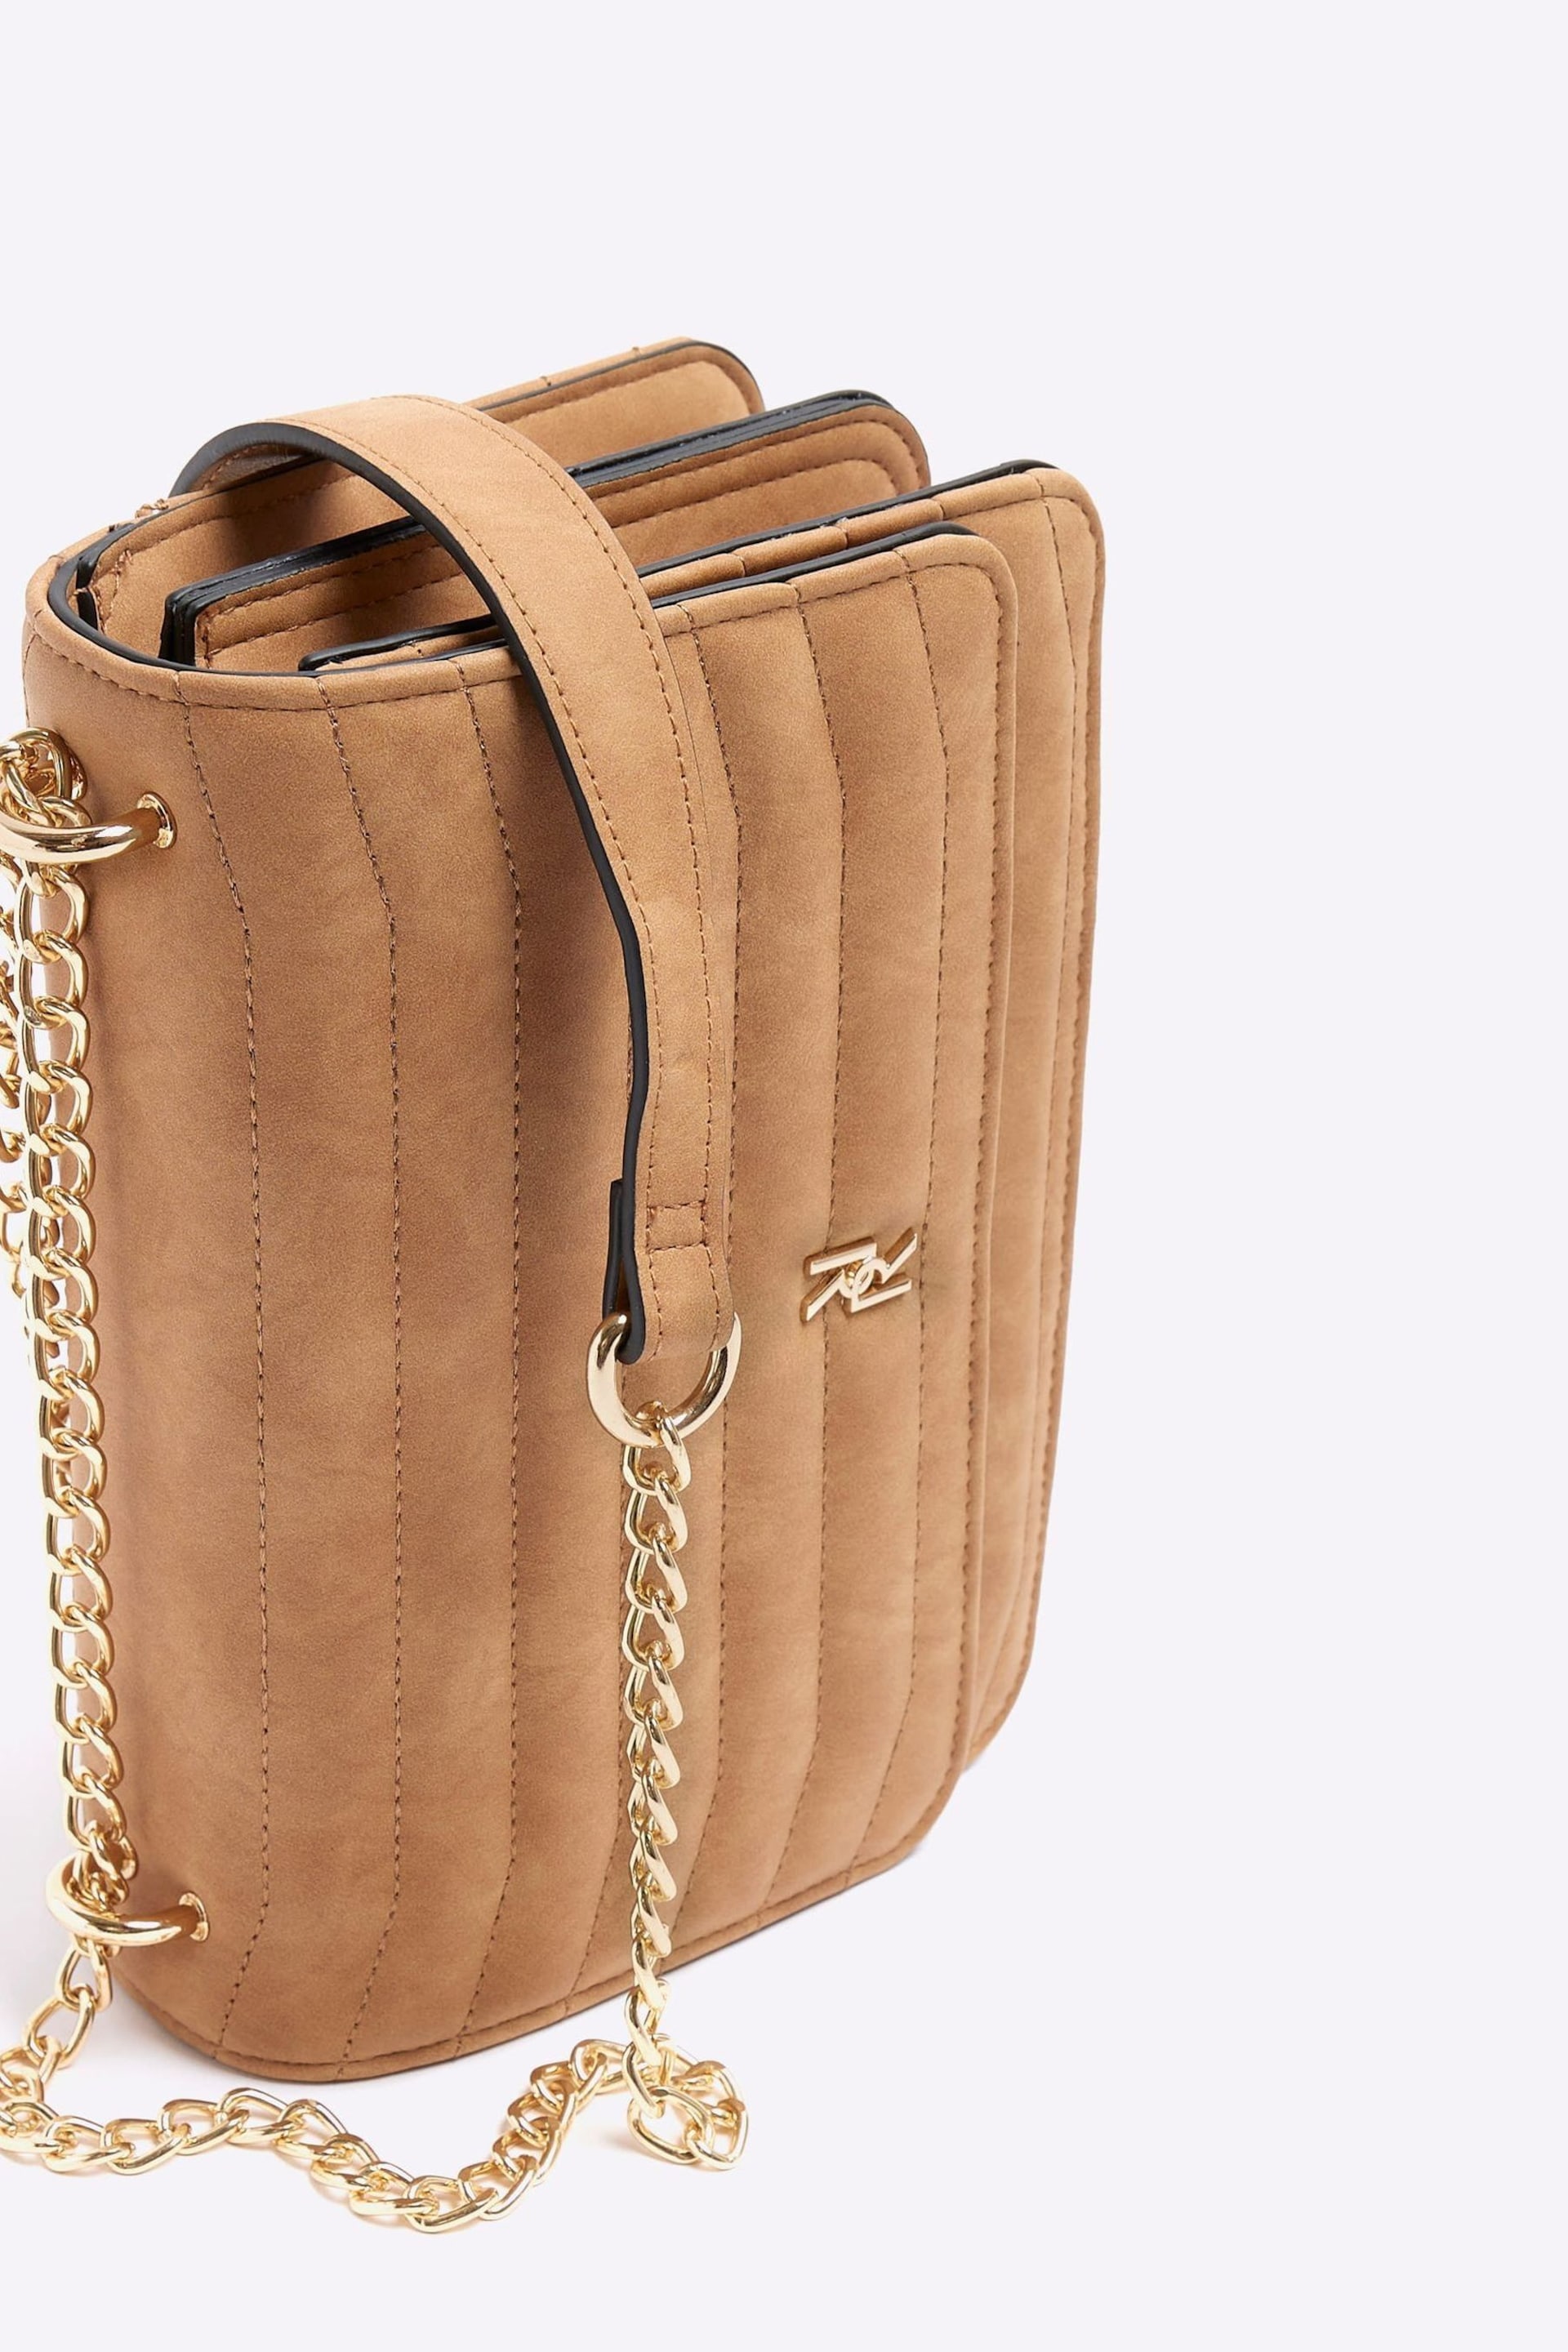 River Island Brown Quilted Chain Shoulder Bag - Image 4 of 4